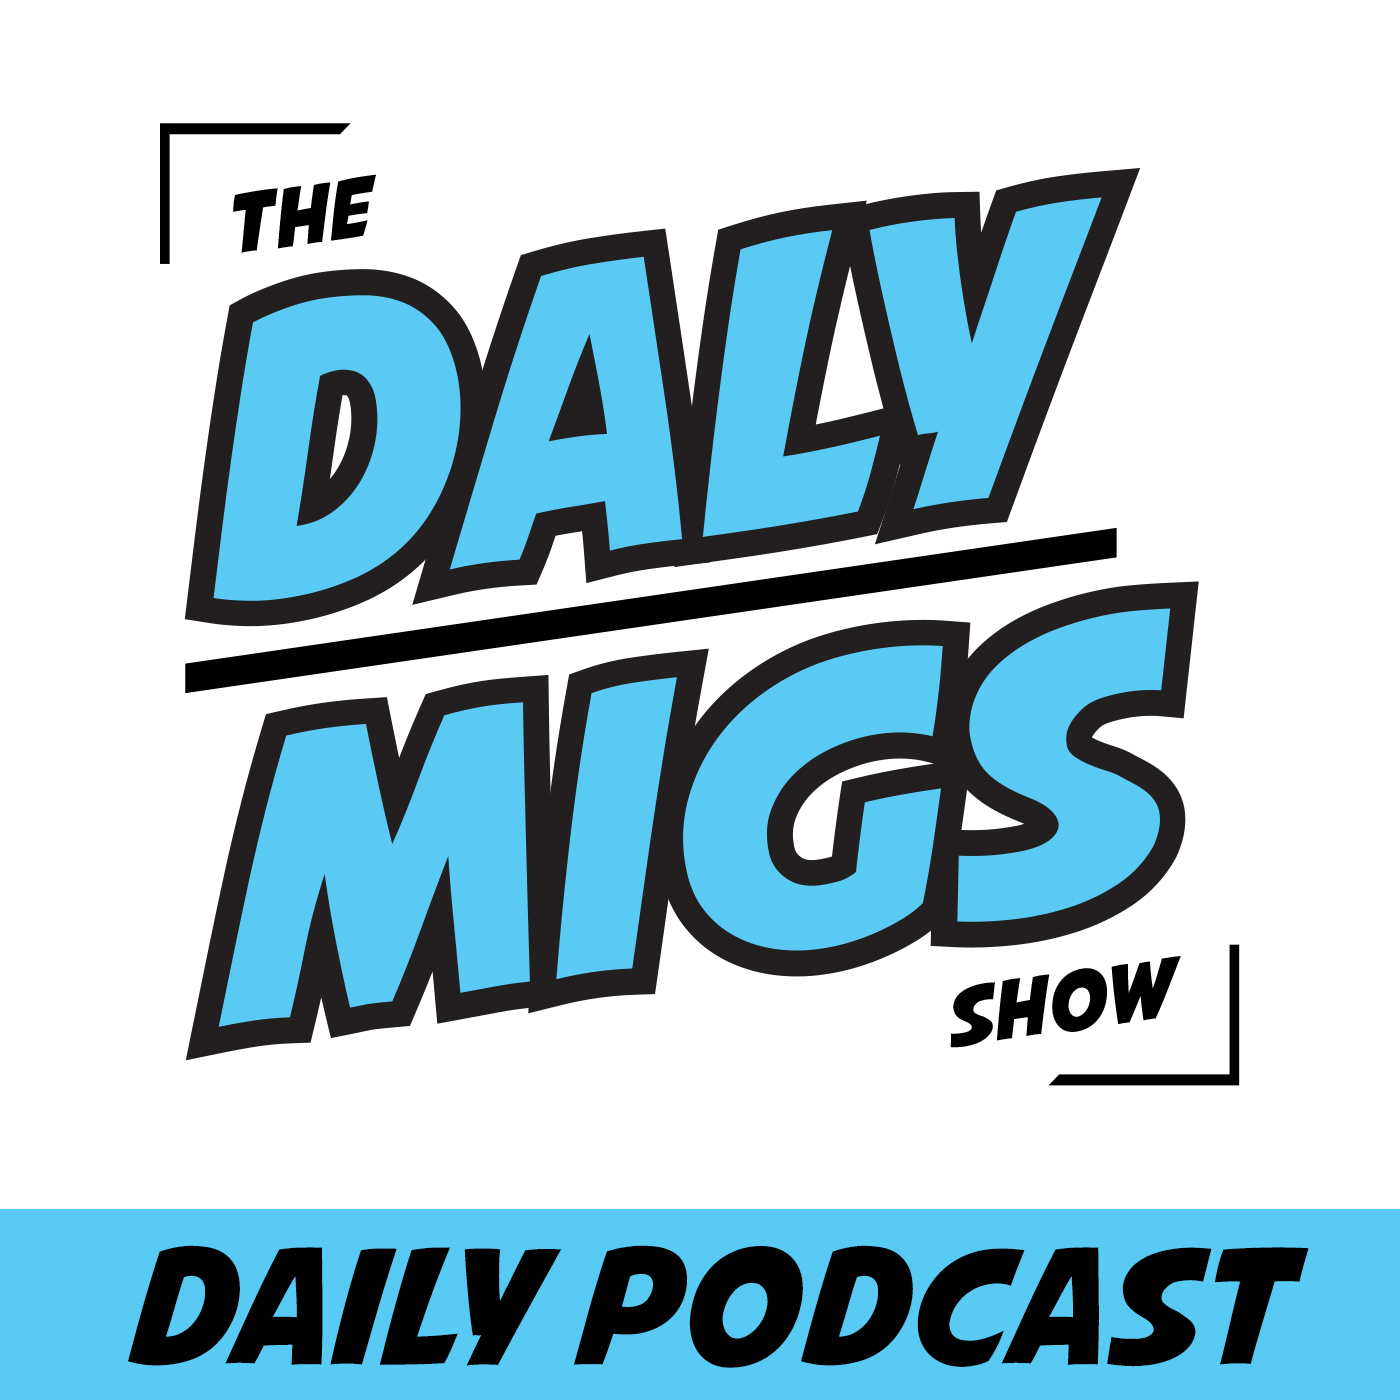 Daily Podcast pt. 3 - "Danny & Steve don't wash their feet?"